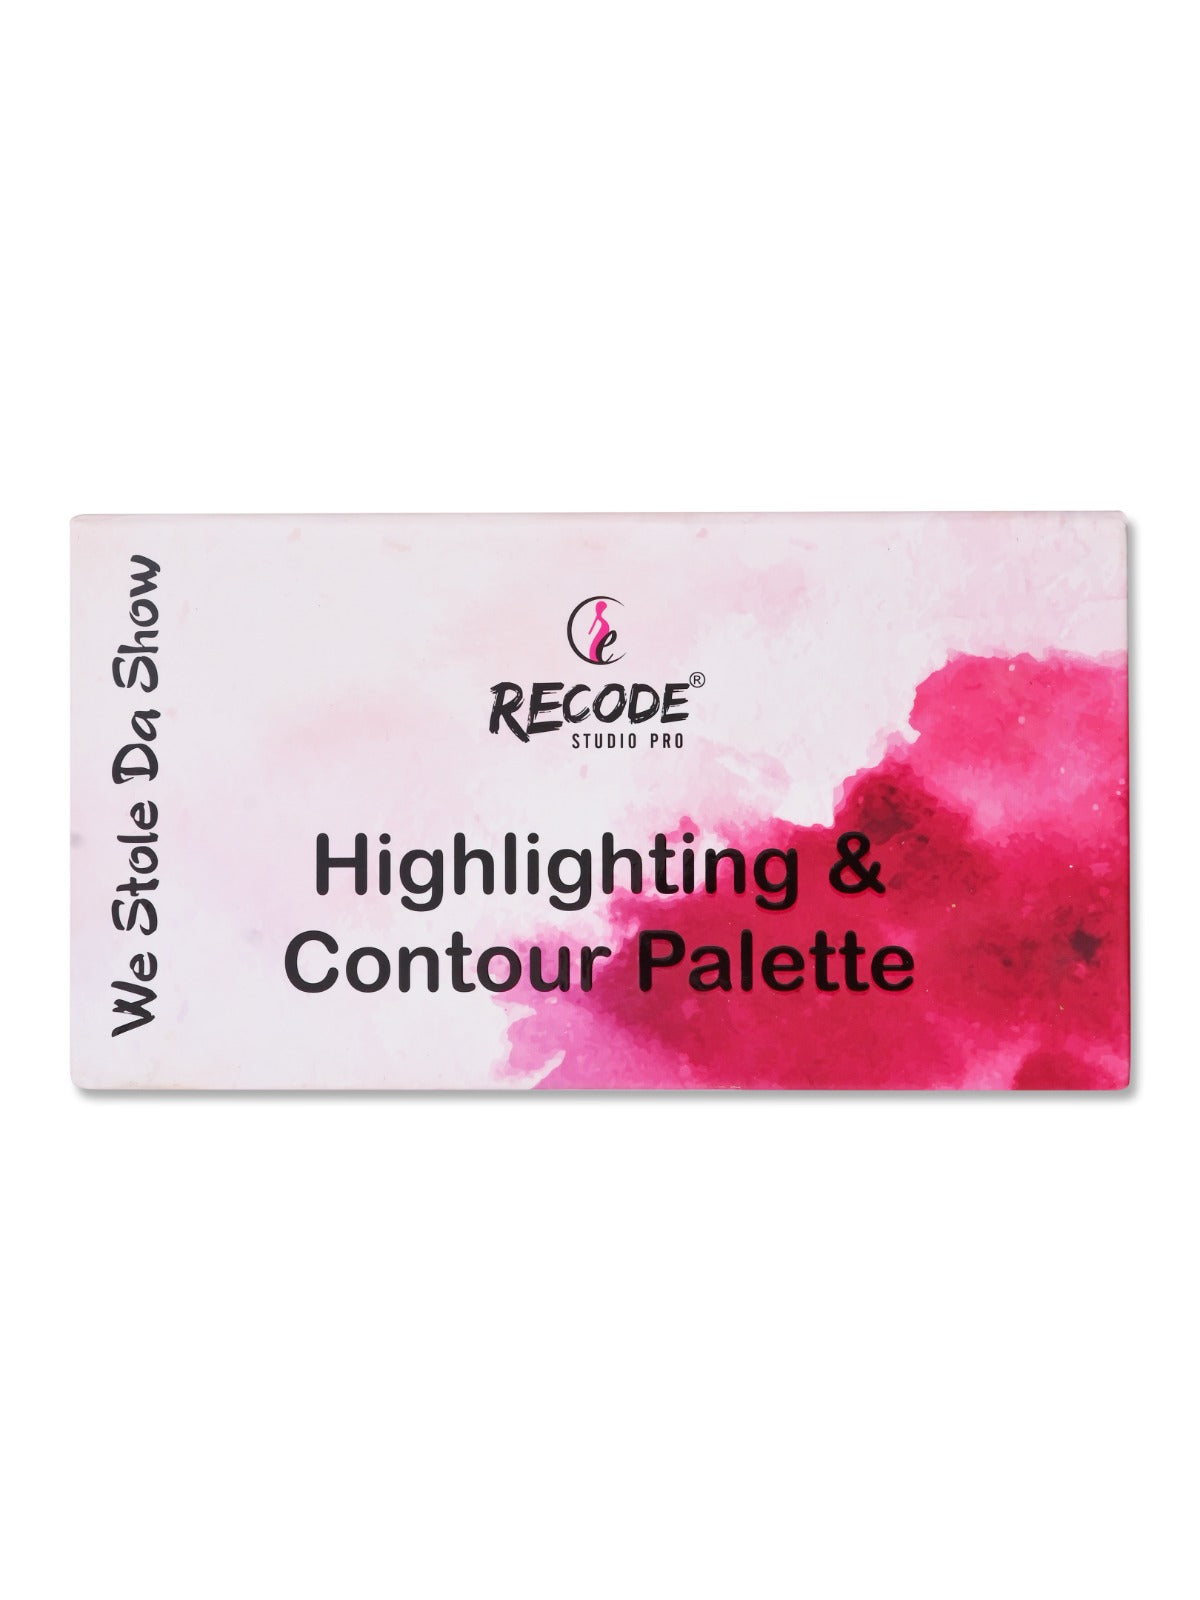 Recode Highlighting & Contour Palette - 36g